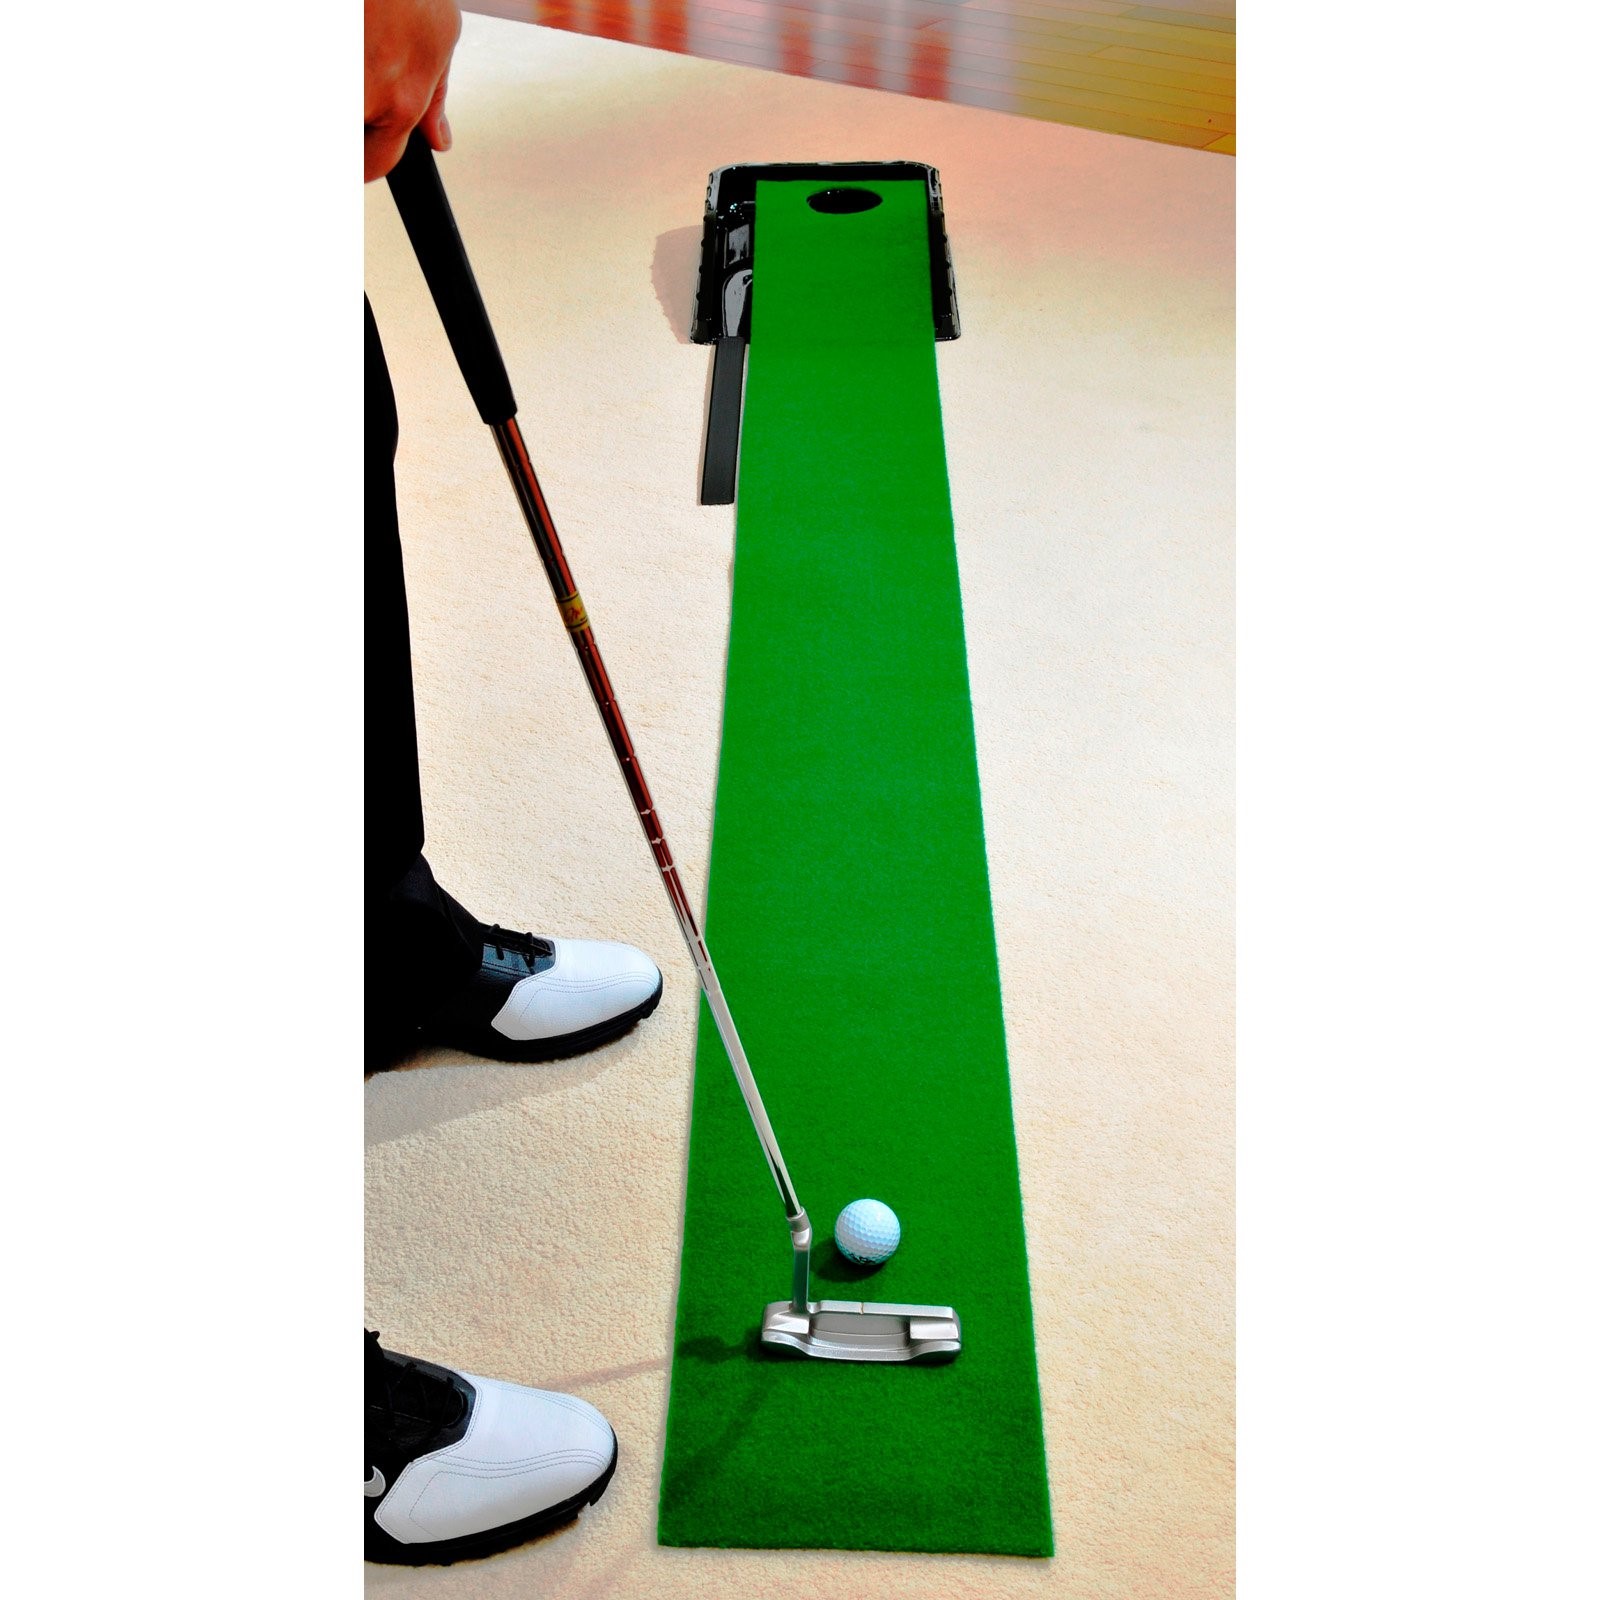 Golf, Gifts, & Gallery Auto Ball Return Putting System - image 5 of 5